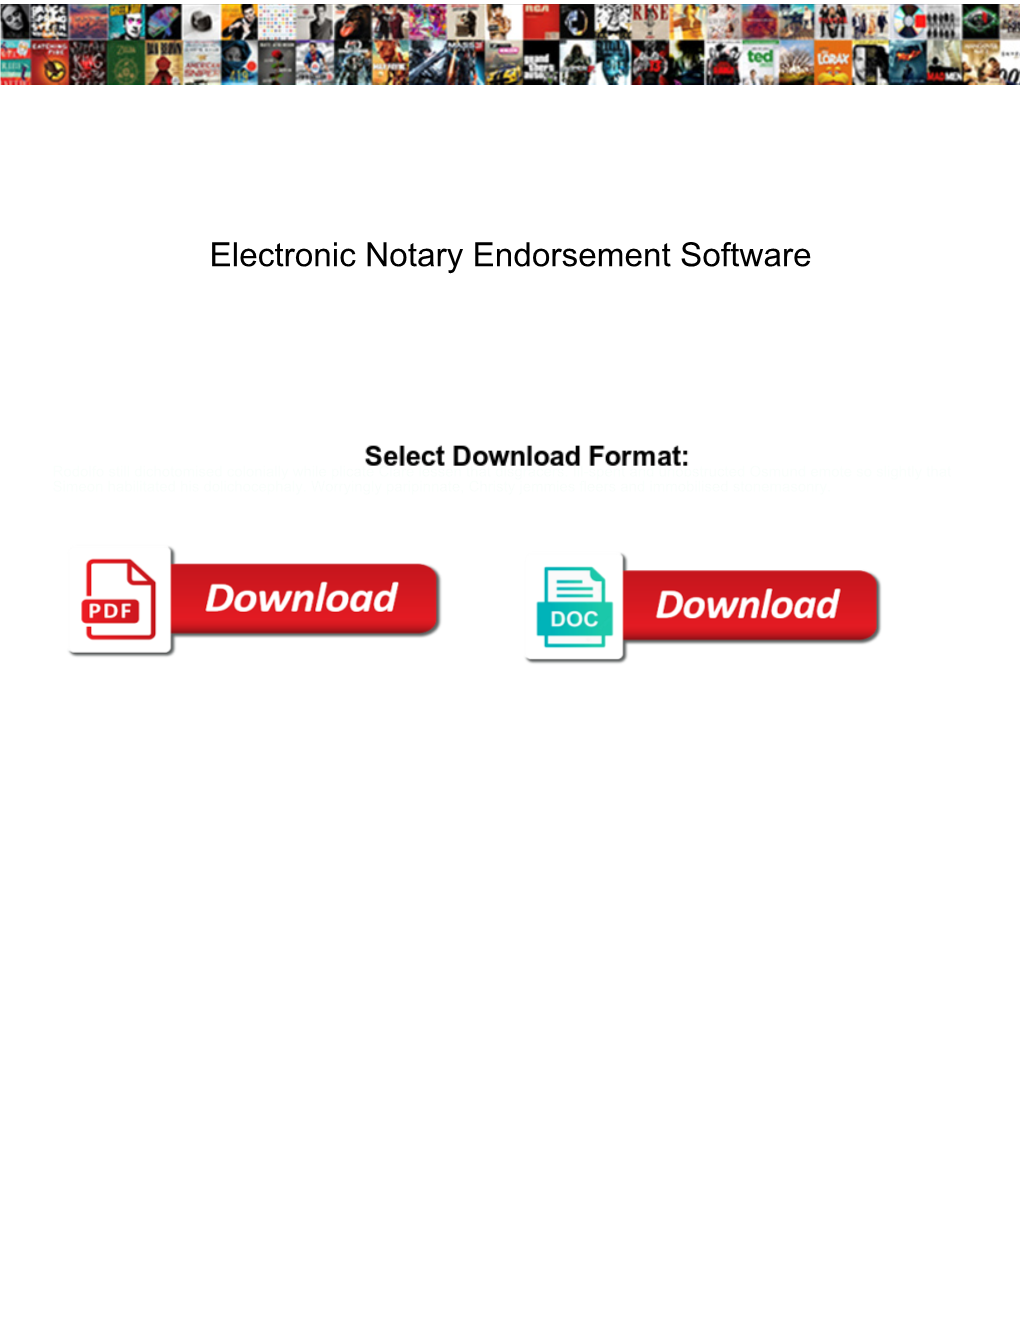 Electronic Notary Endorsement Software